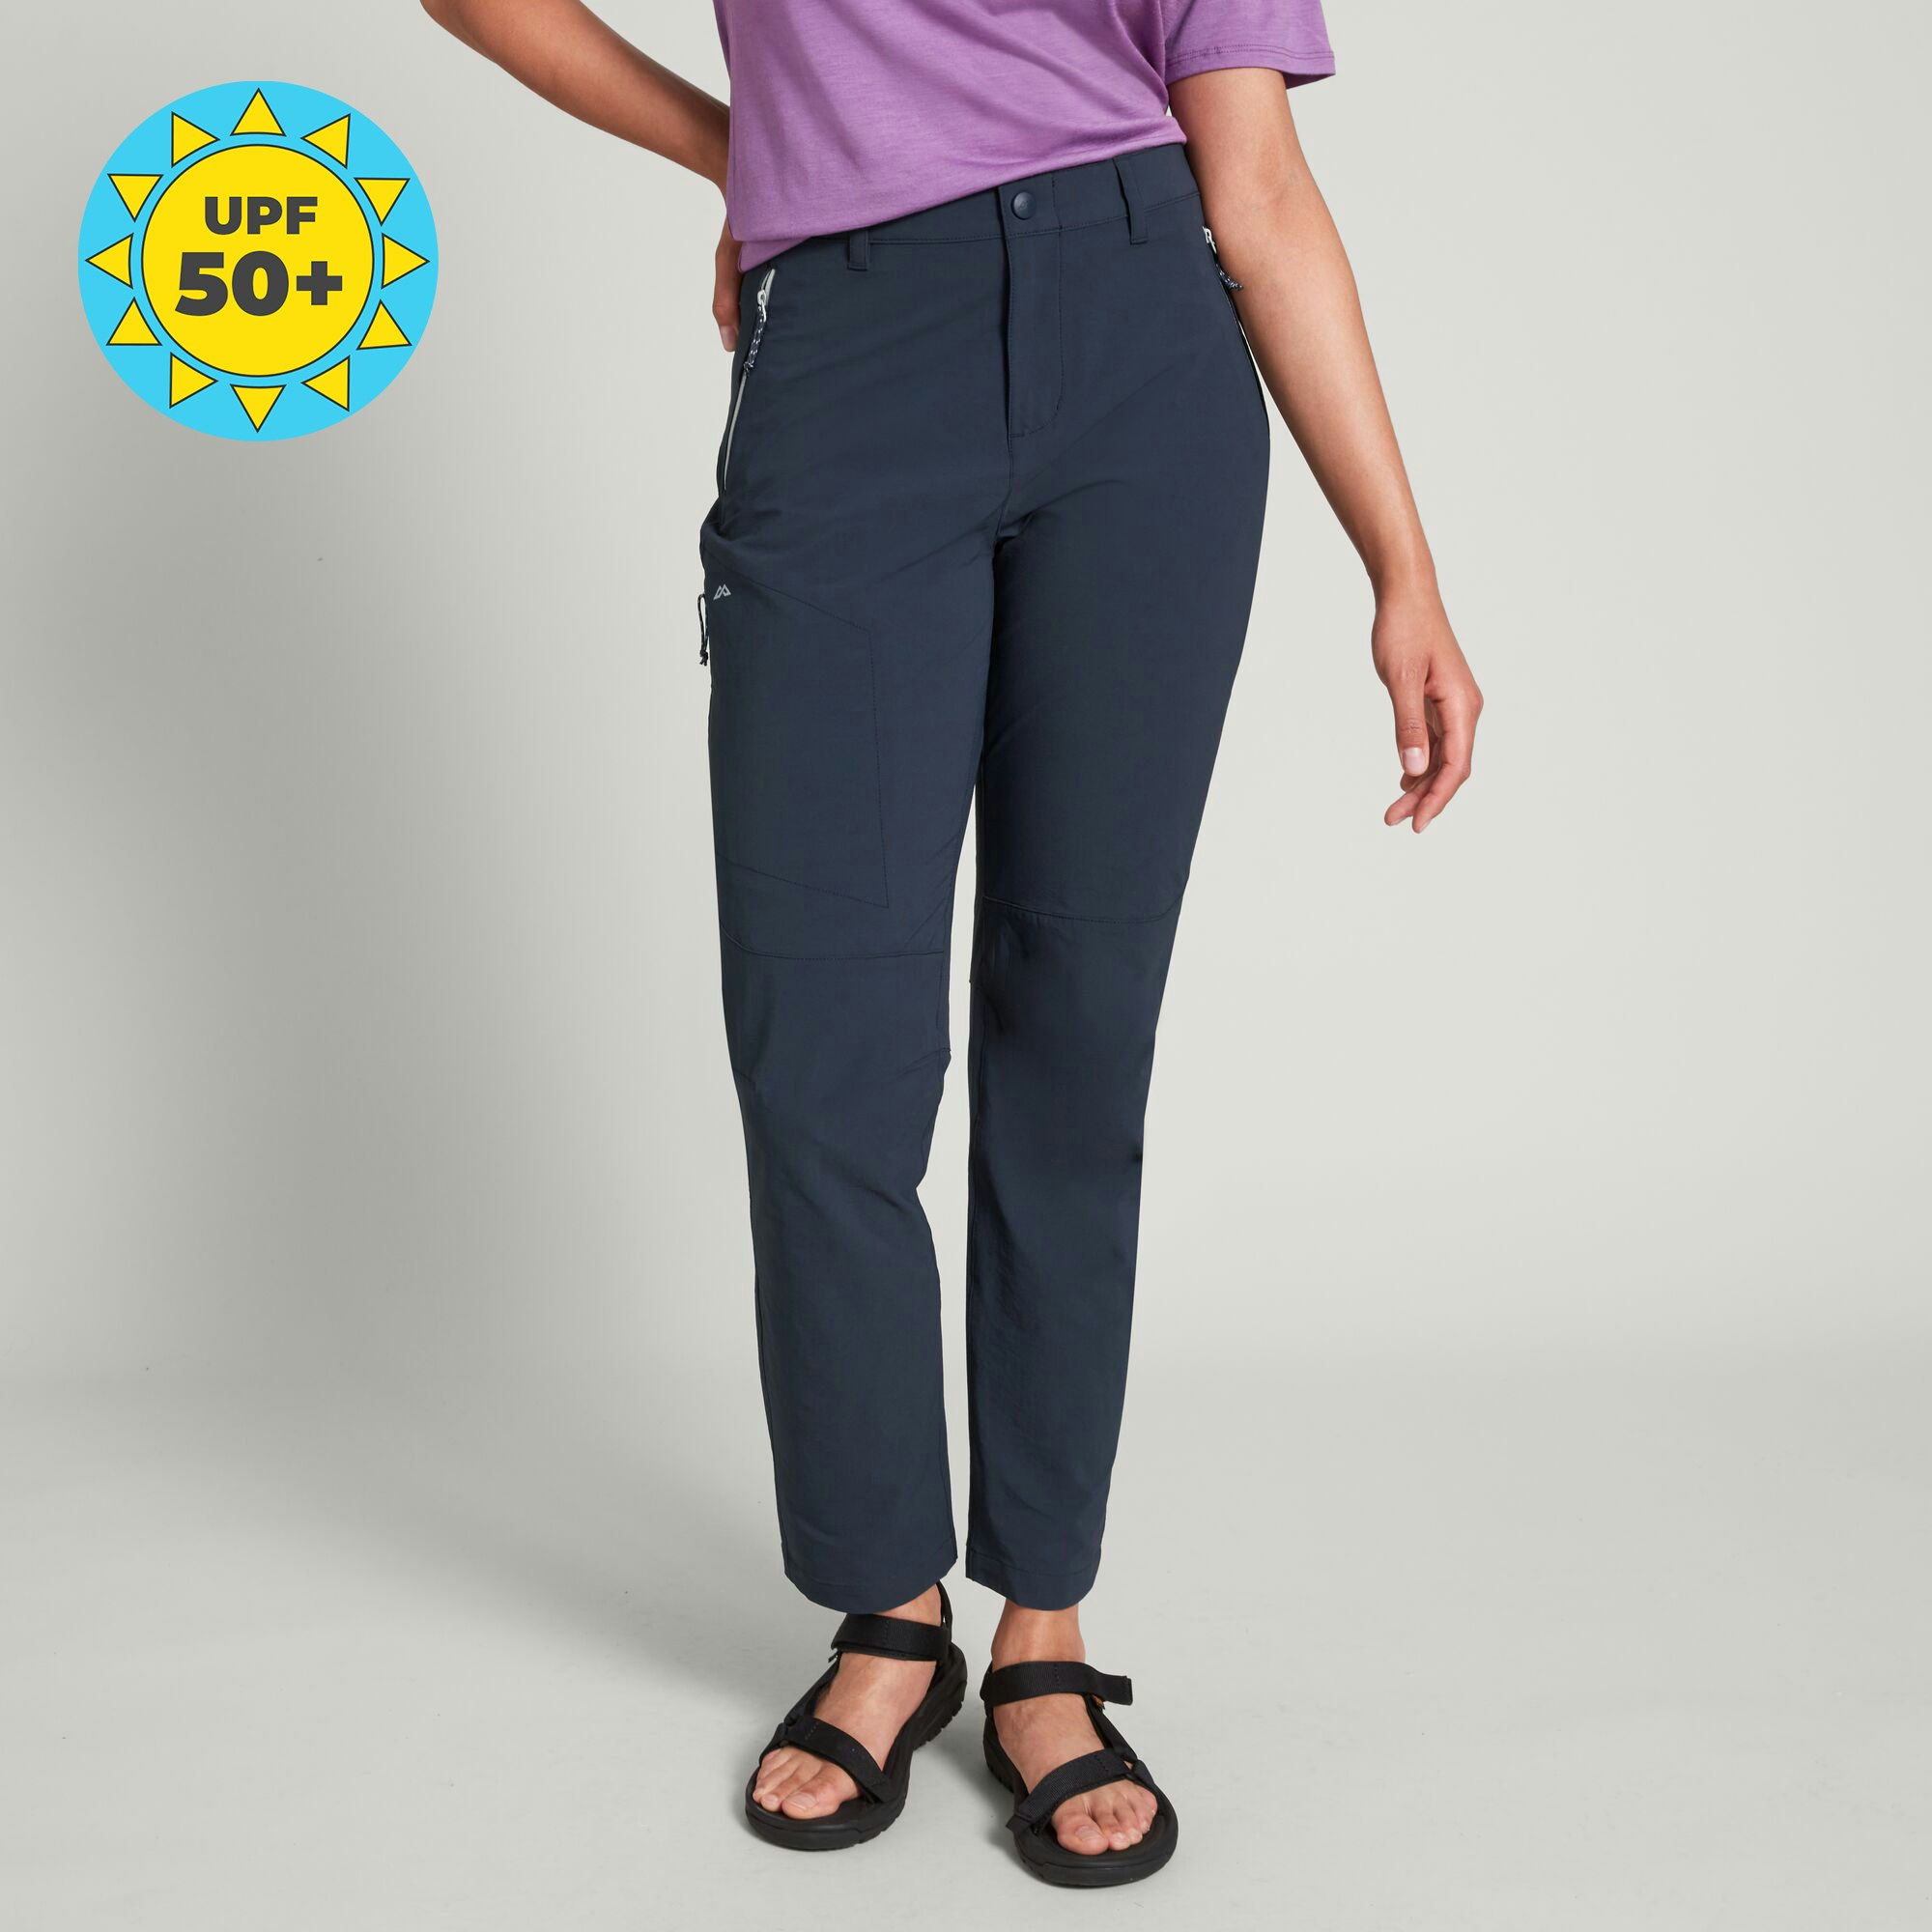 Yellow Climbing and Trekking Trousers Woman Saona. Buy online Jeans.